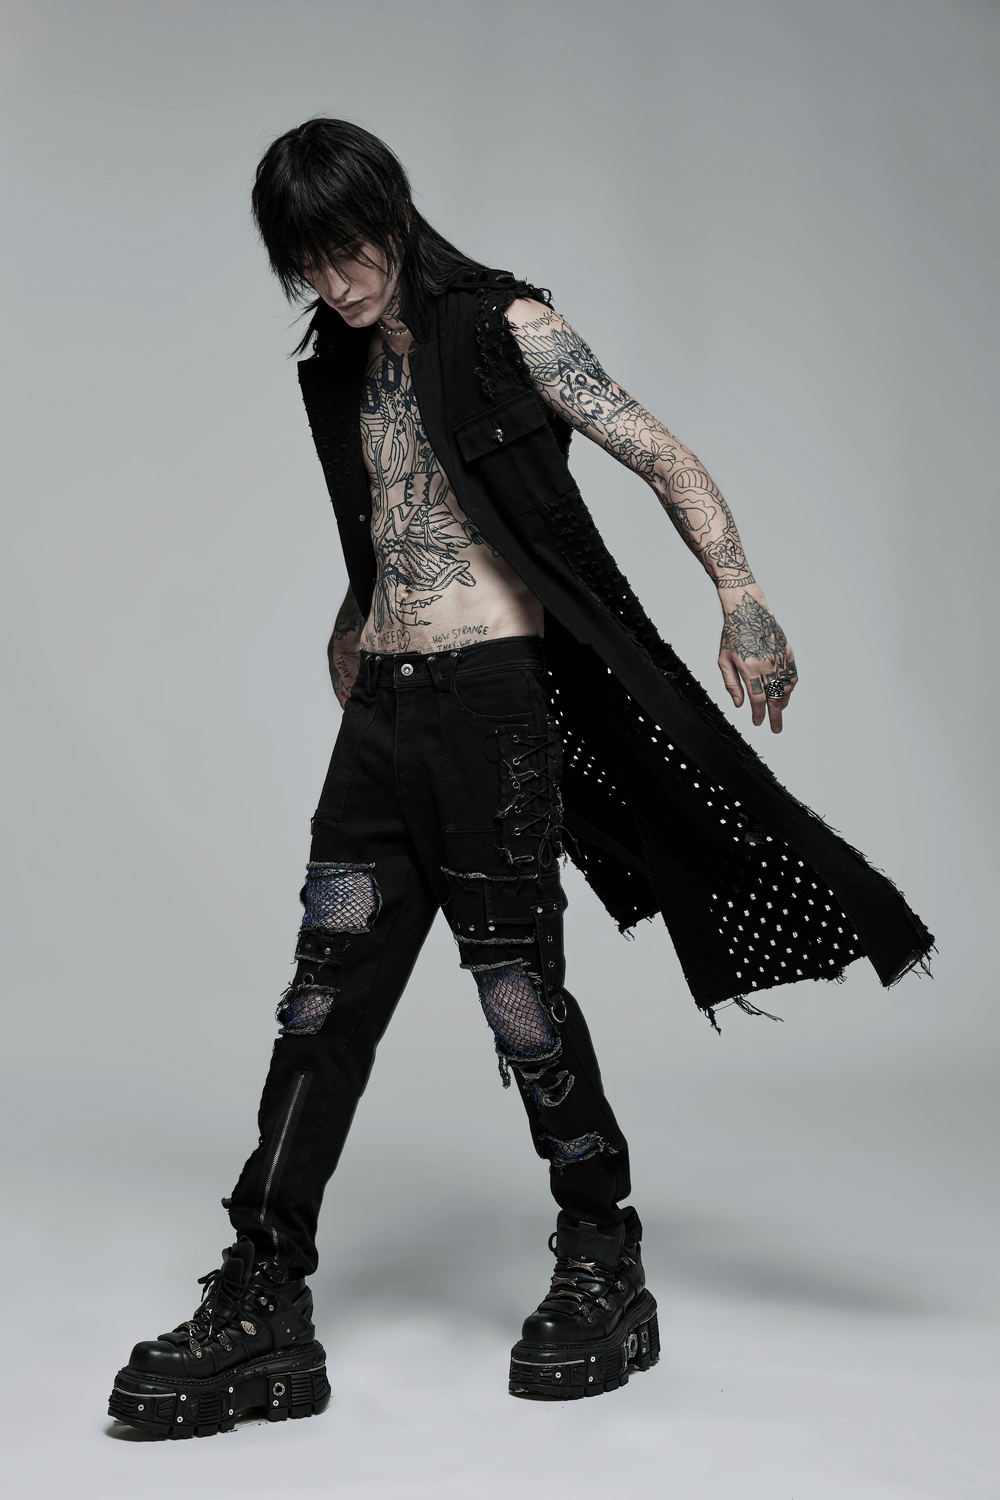 Edgy Punk Old Medium-Length Cape with Distressed Detailing - HARD'N'HEAVY